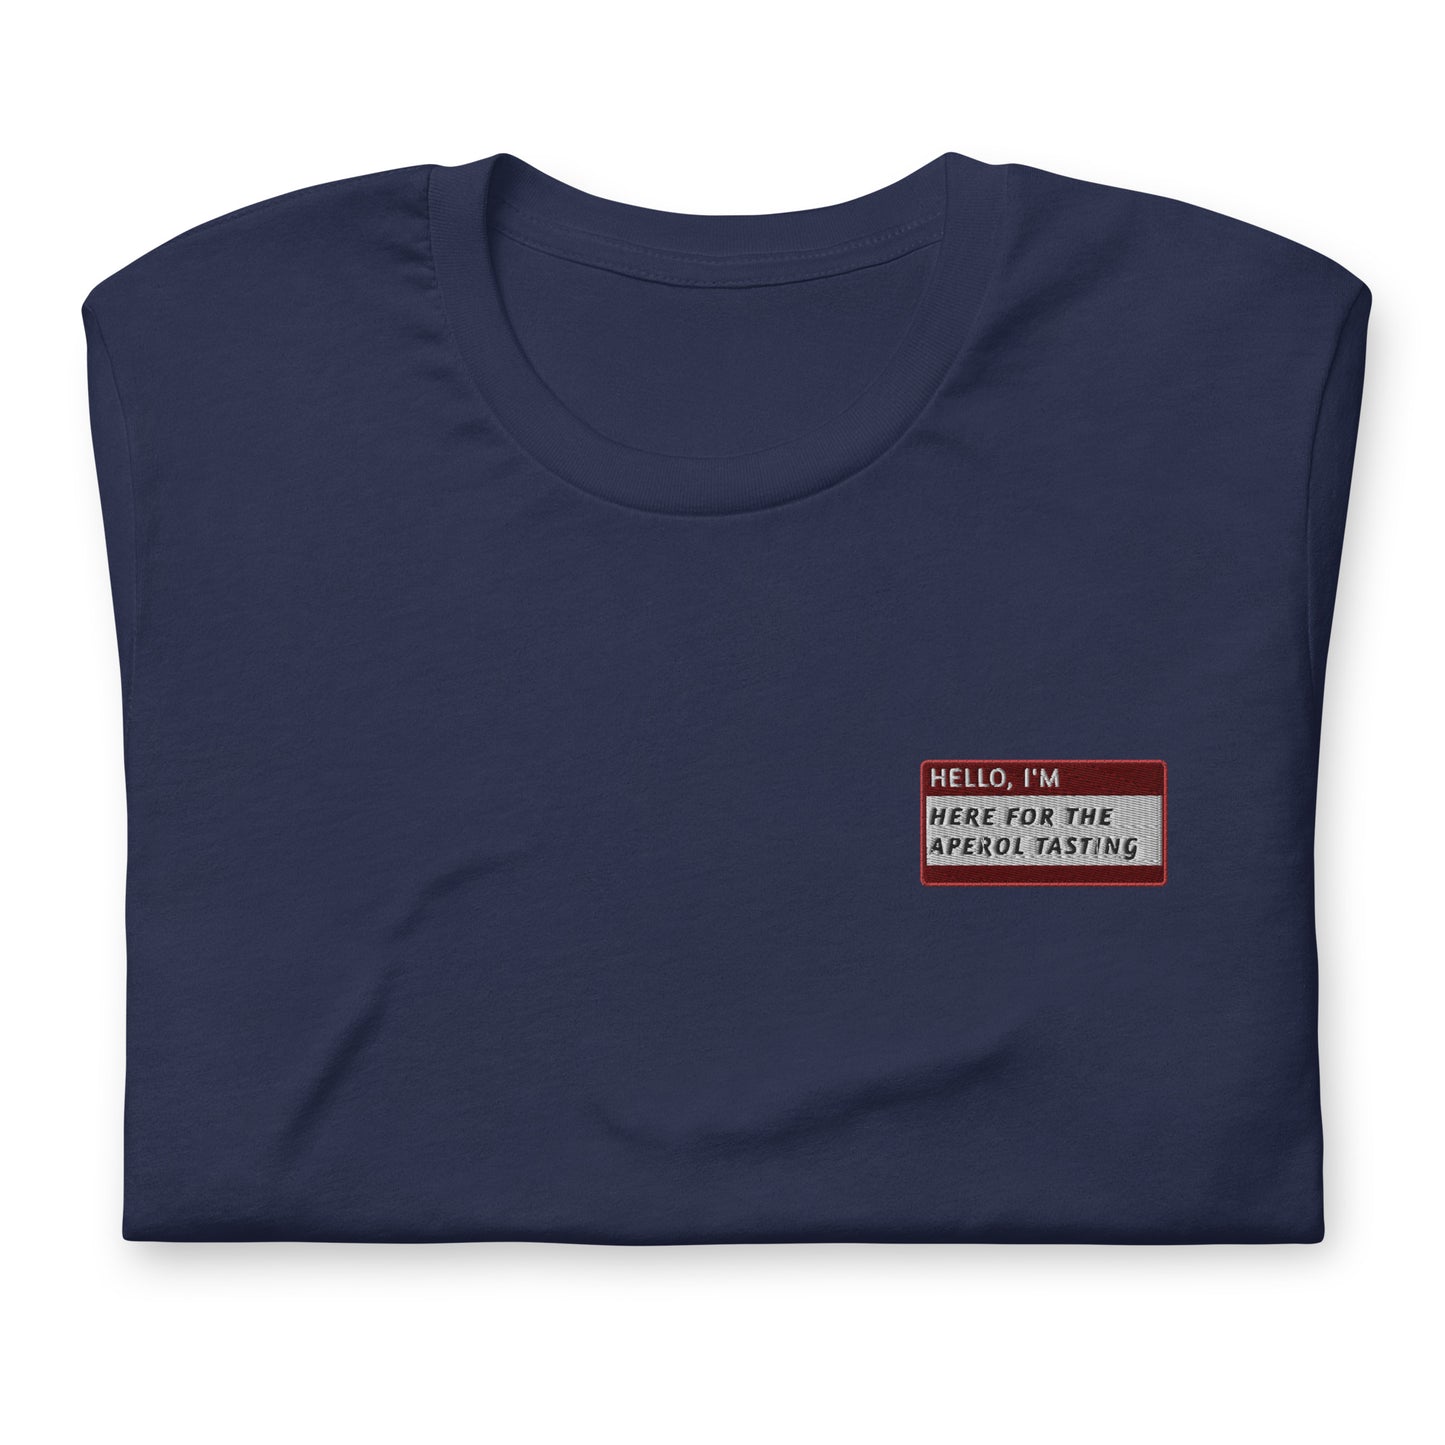 HELLO I'M HERE FOR THE APEROL TASTING - Name Tag T-Shirt